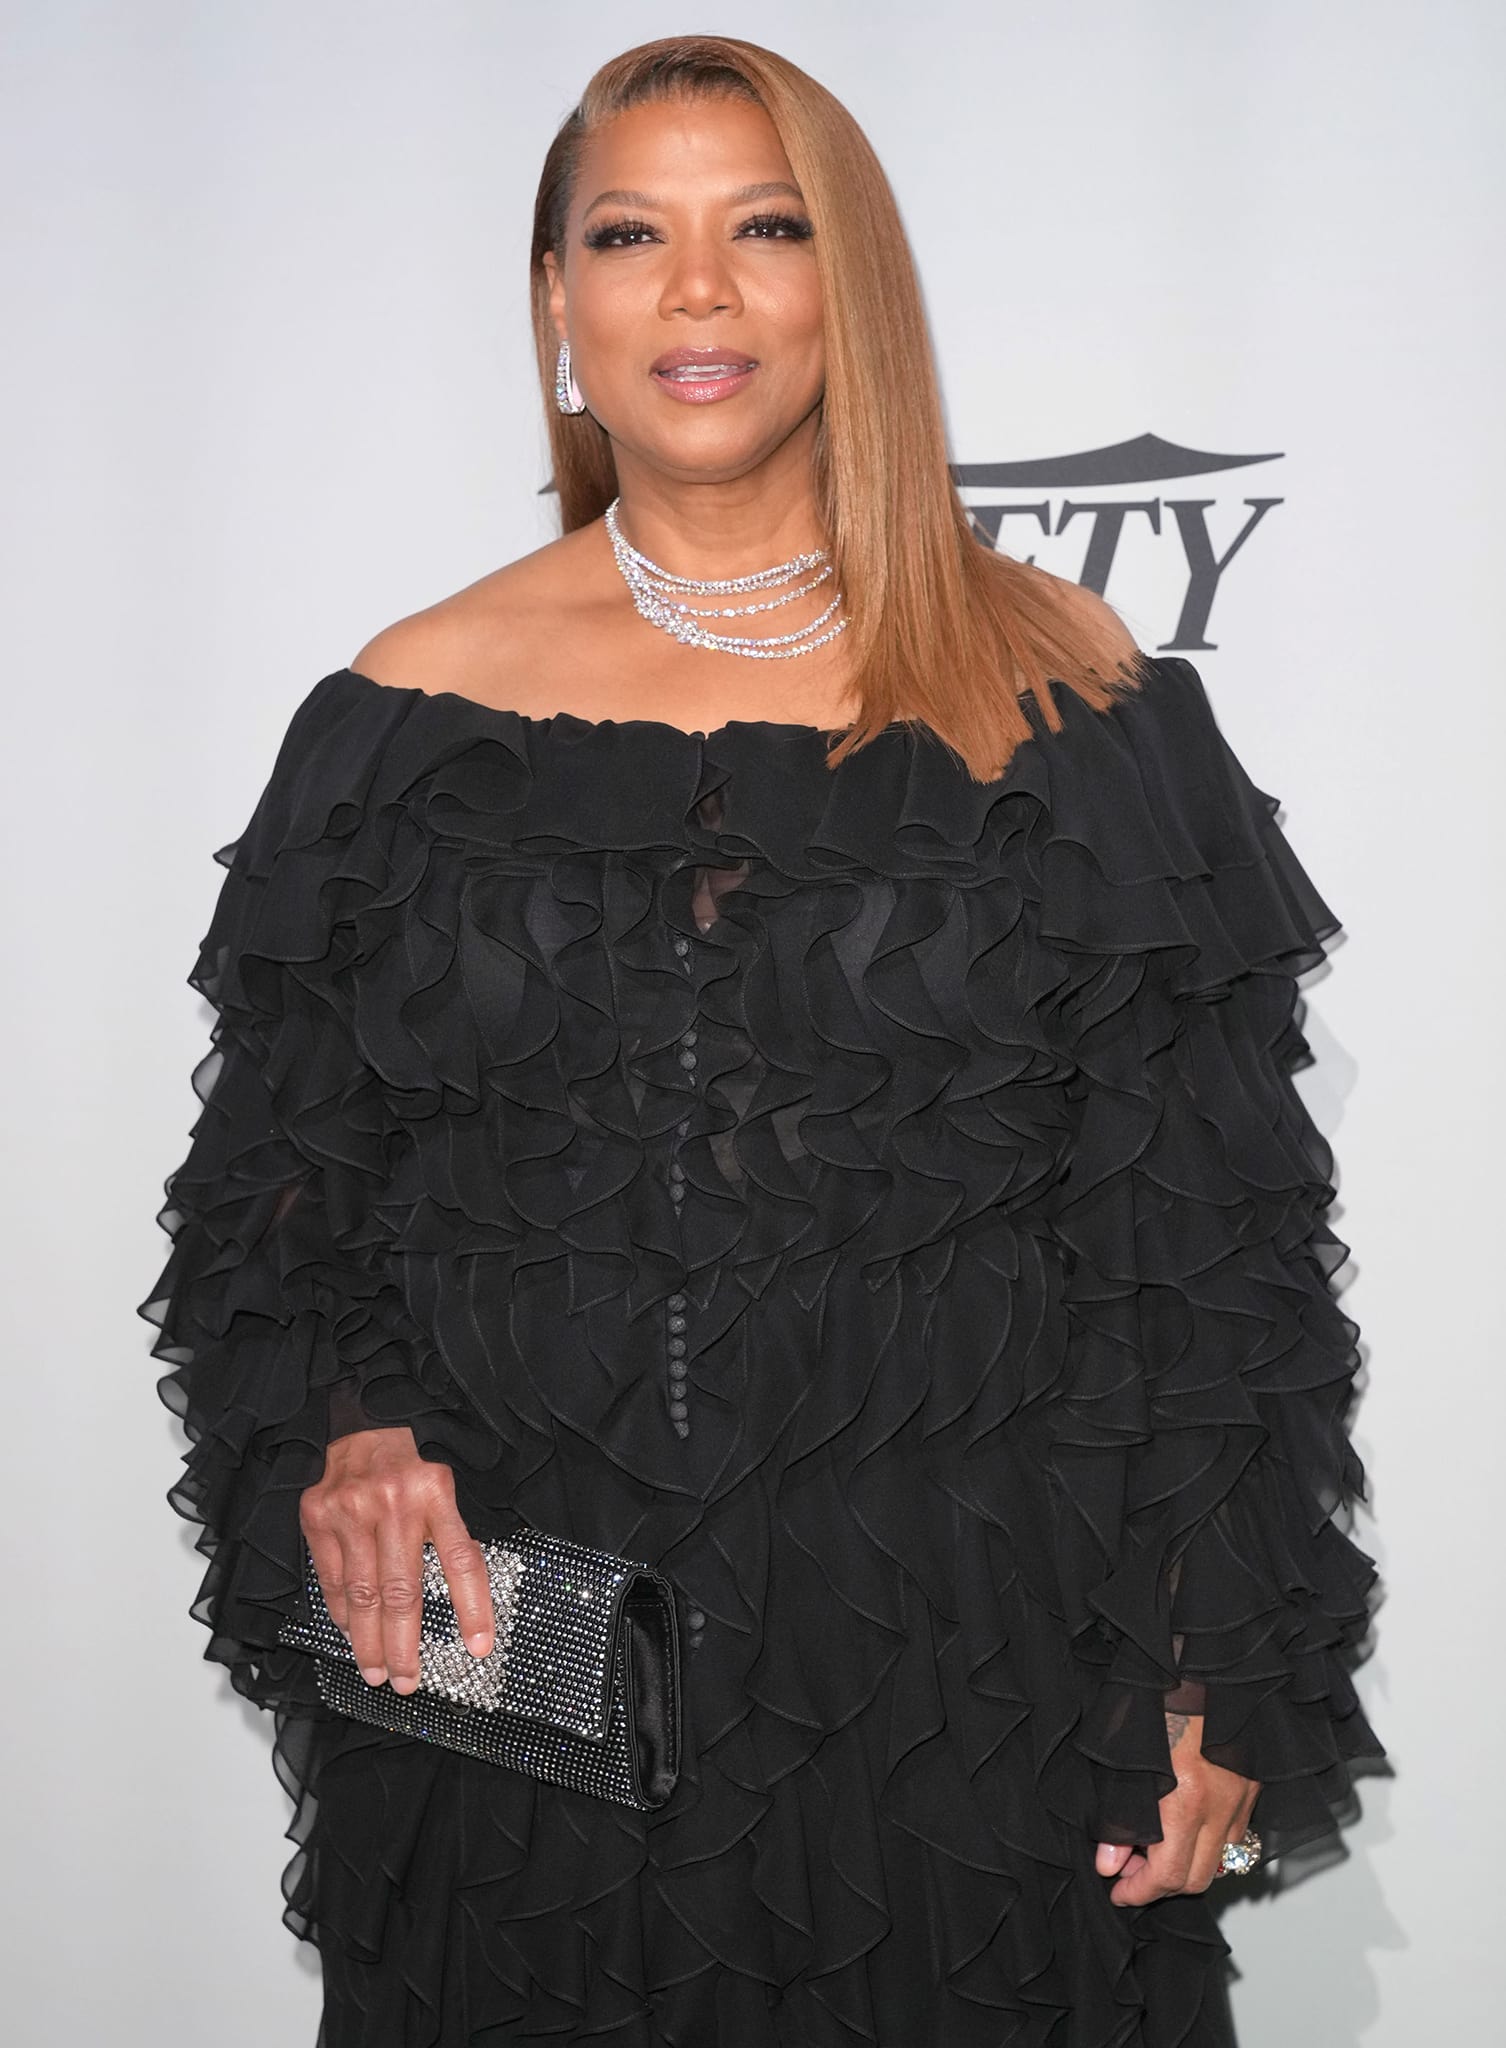 Queen Latifah at the 2022 Variety Power of Women event on May 5, 2022